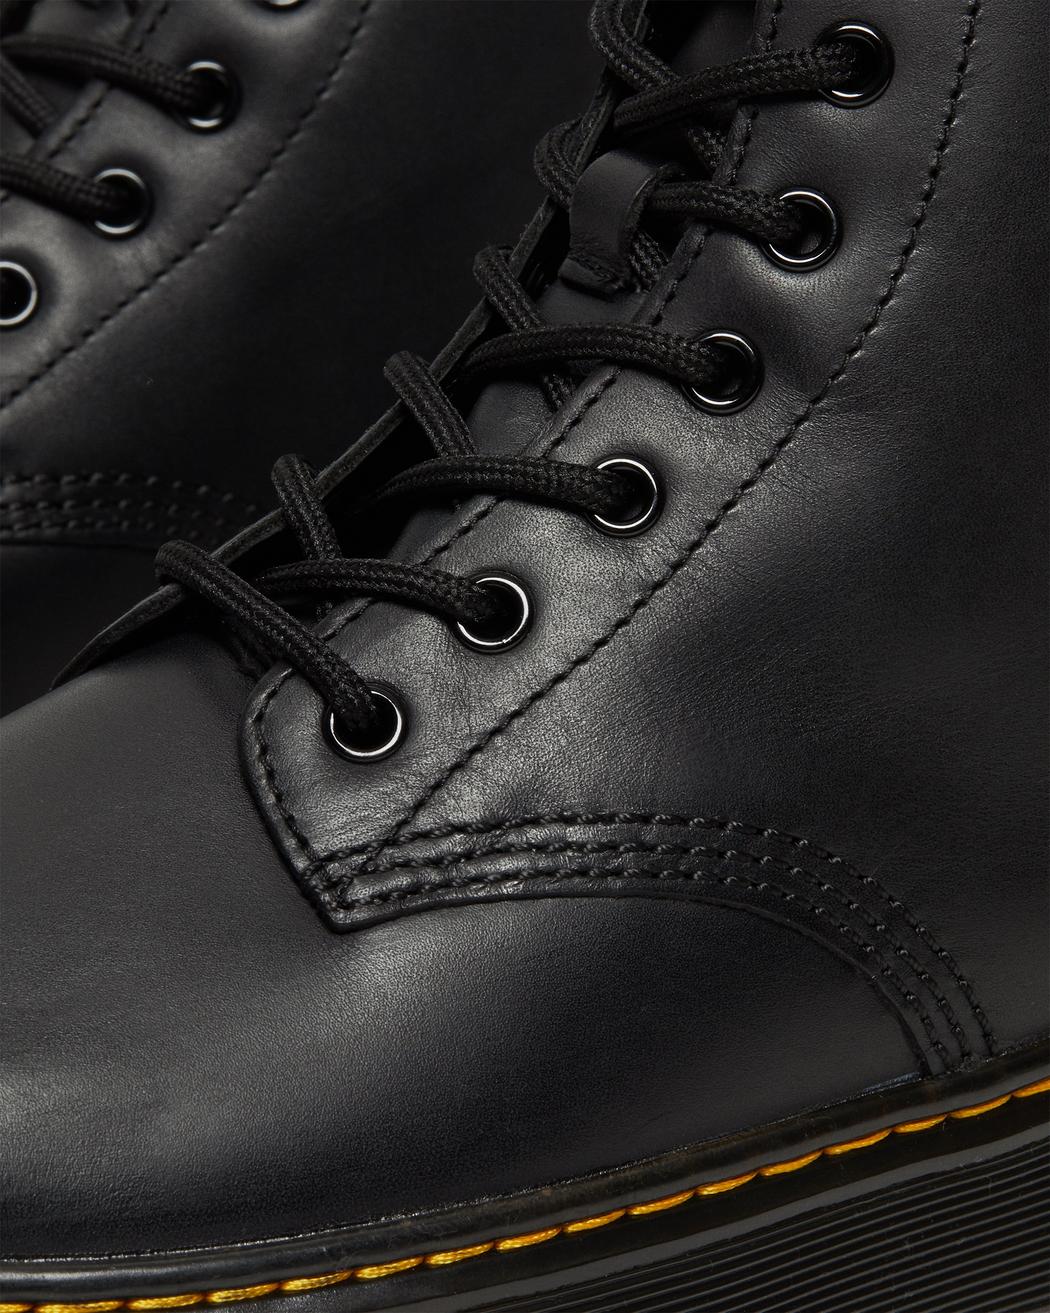 Thurston Leather Boots | Dr. Martens